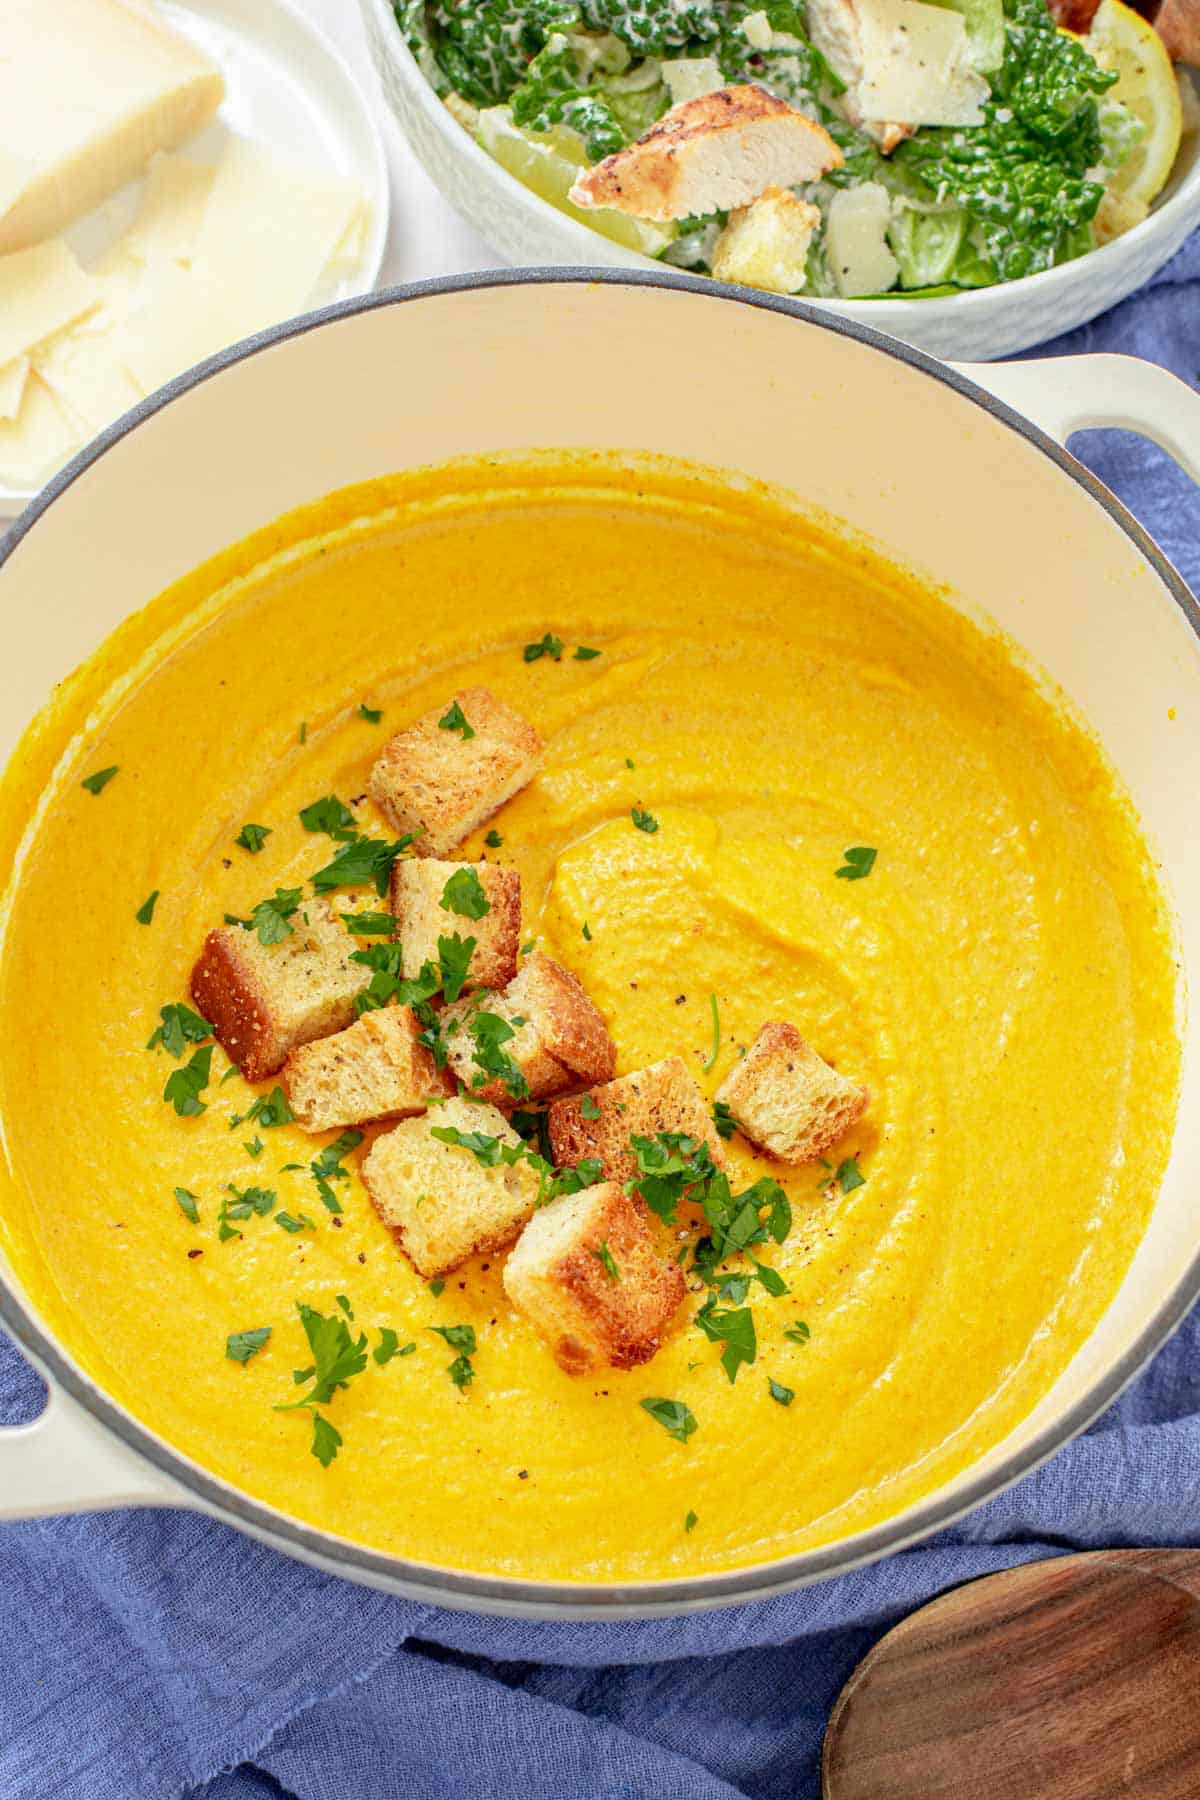 This creamy carrot soup with turmeric and ginger is so warming, full of flavors and has amazing healing properties.  The combination of turmeric, ginger, sweet paprika and vegetables make one easy and delicious soup recipe that is also vegan, gluten-free and dairy free.- The Yummy Bowl